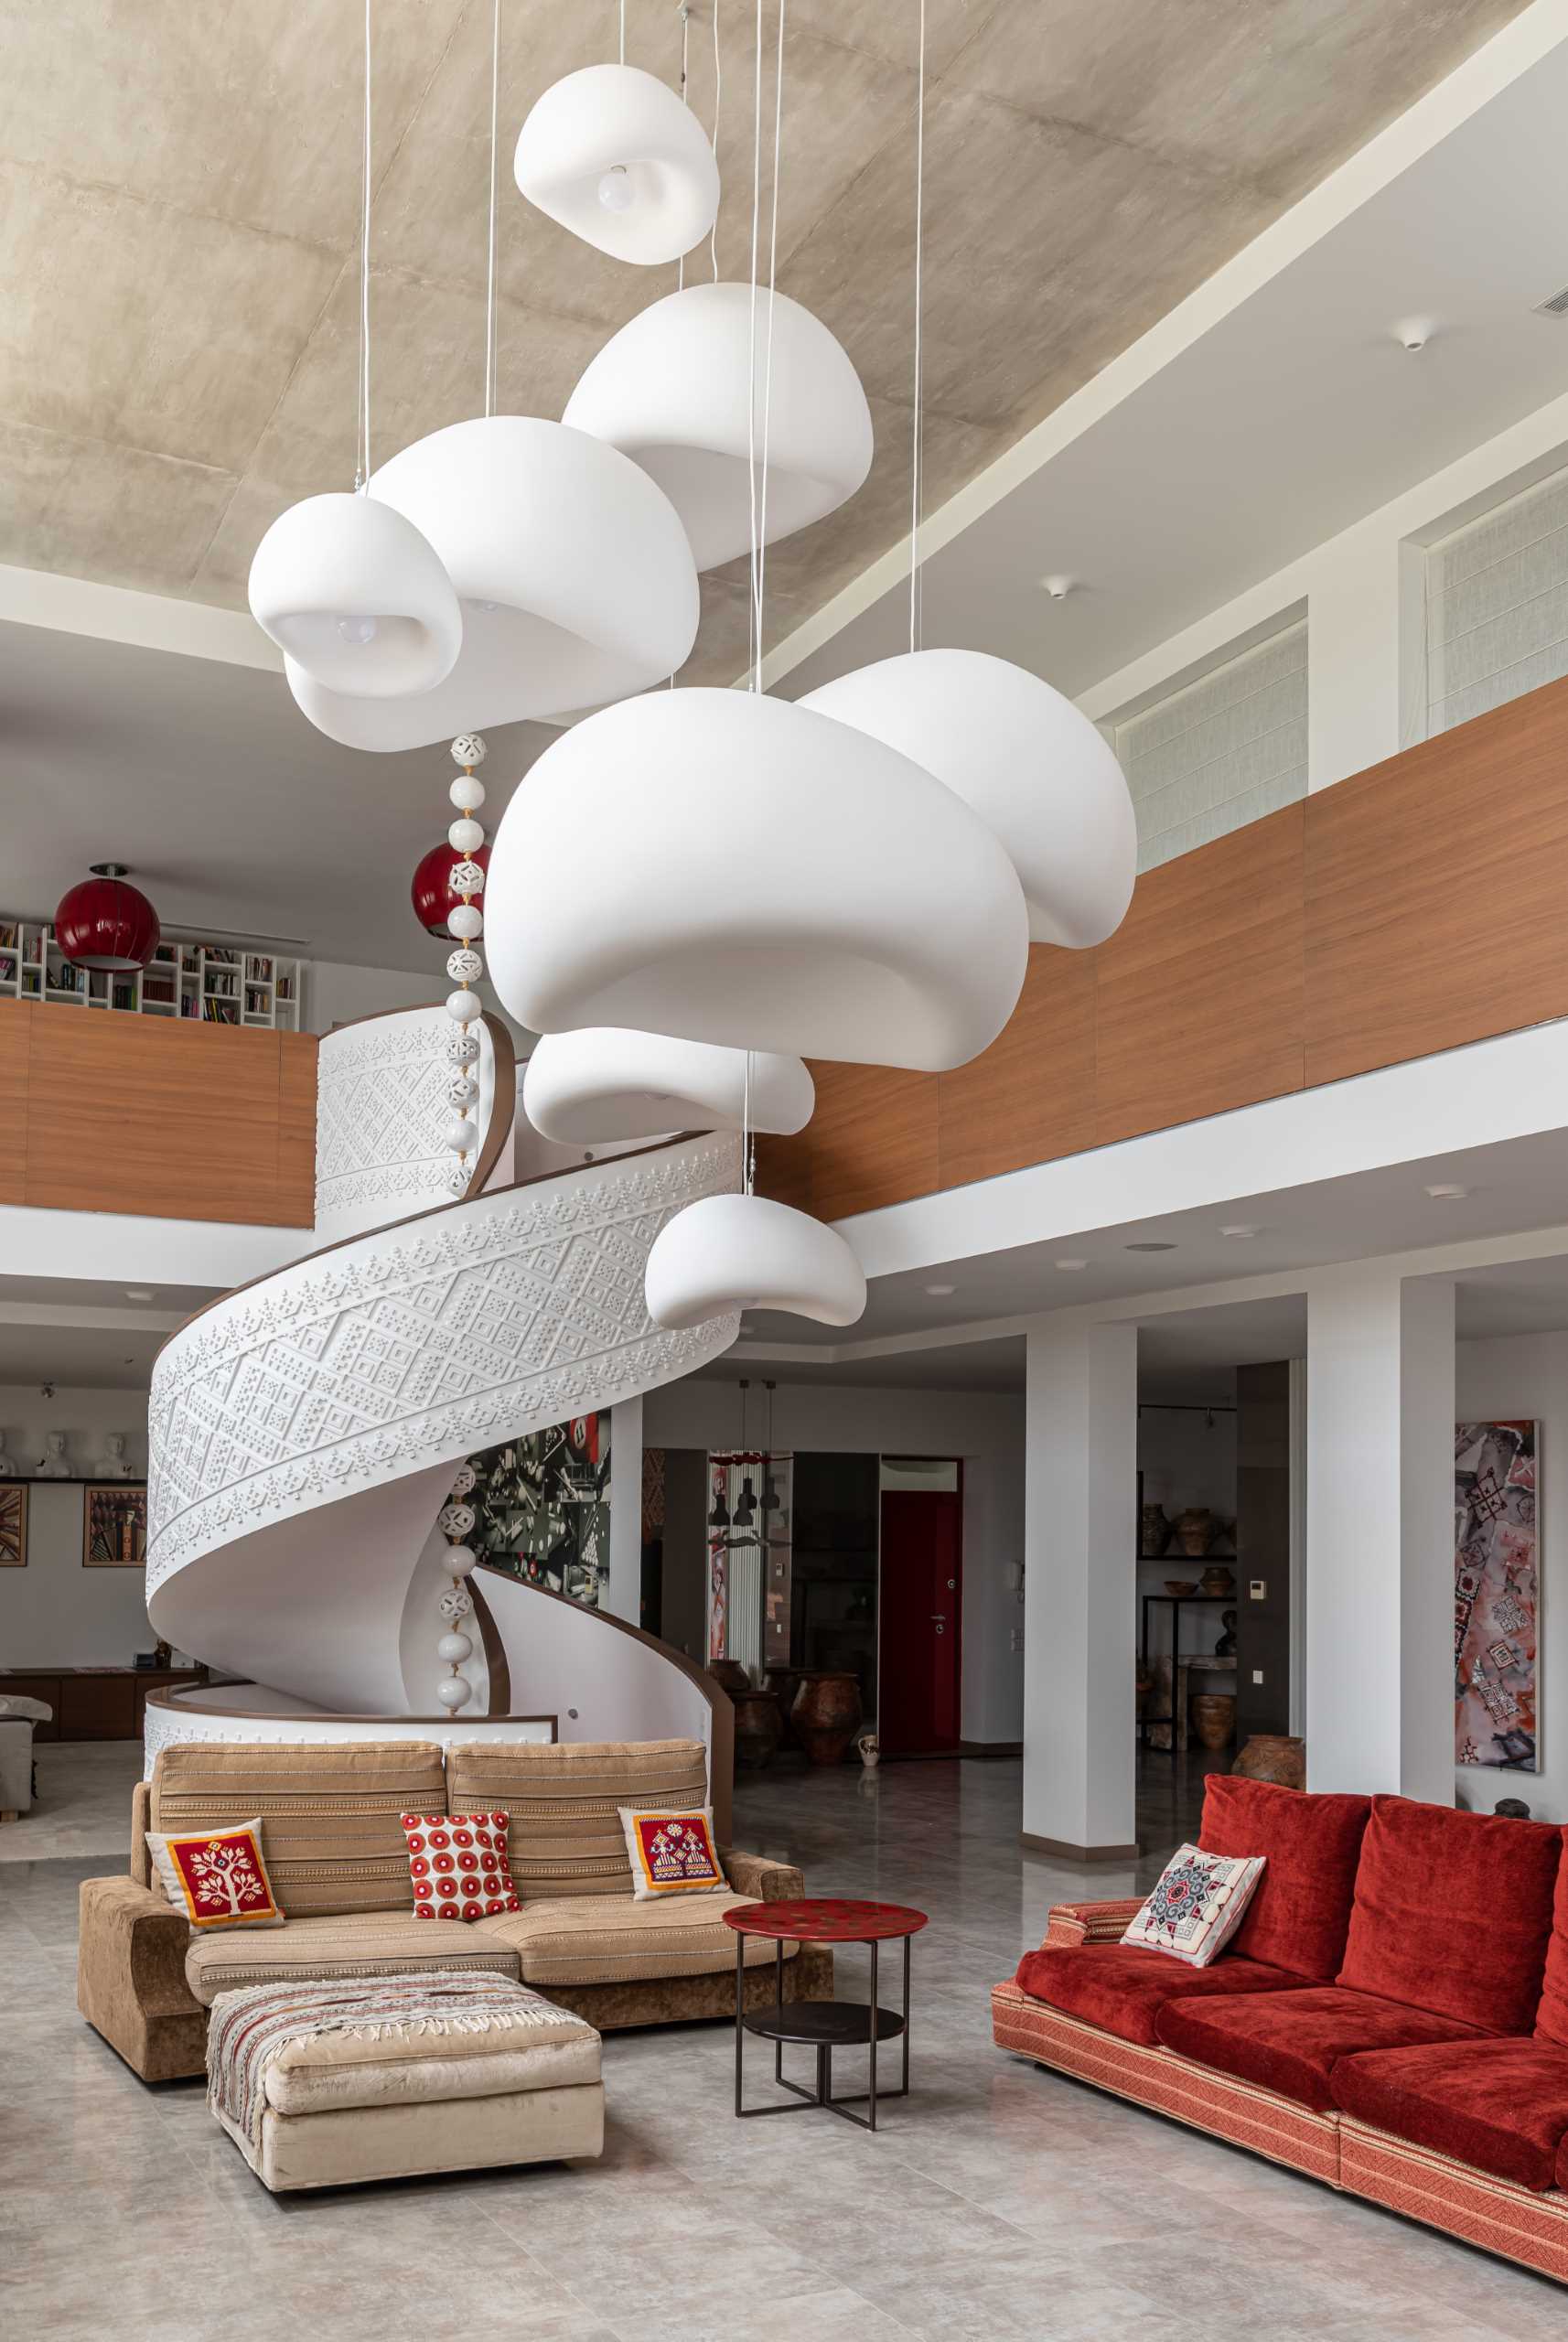 A living room with a white spiral staircase with a delicate pattern on its exterior and wood handrails, also includes sculptural pendant lights.